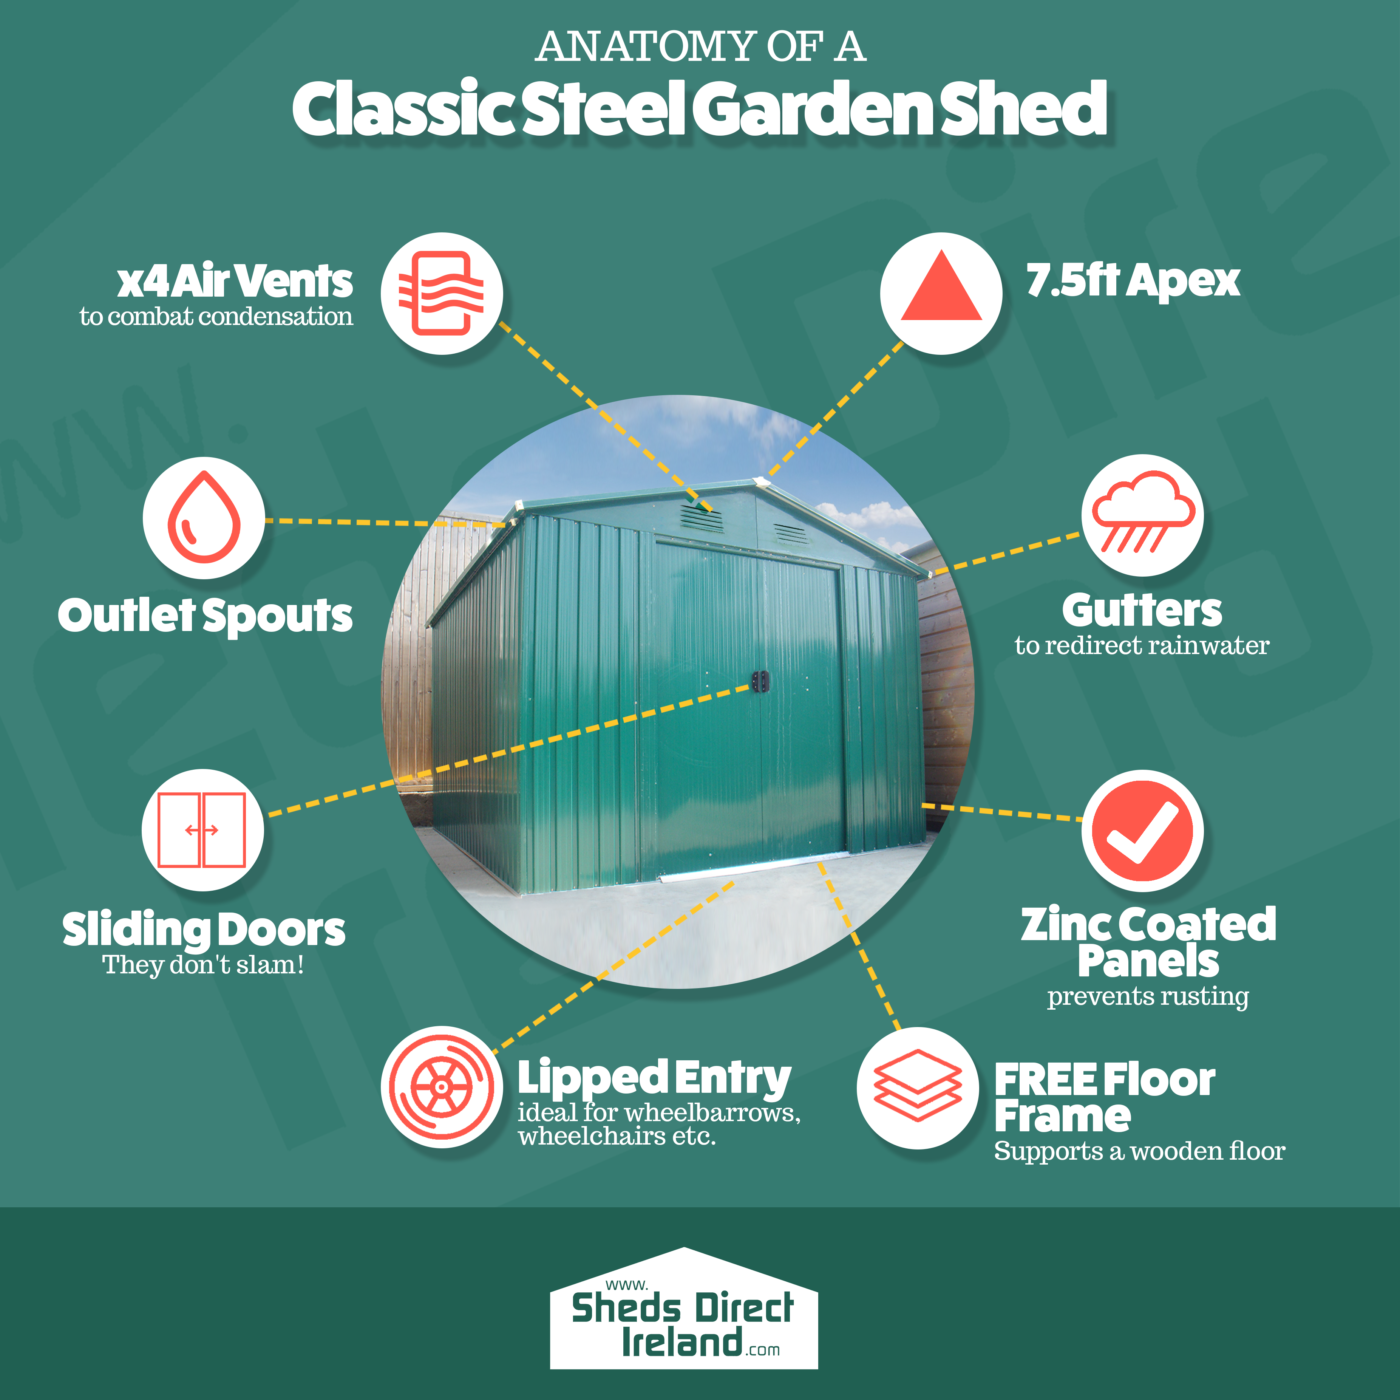 Infographic depicting the anatomy of a classic steel garden Shed